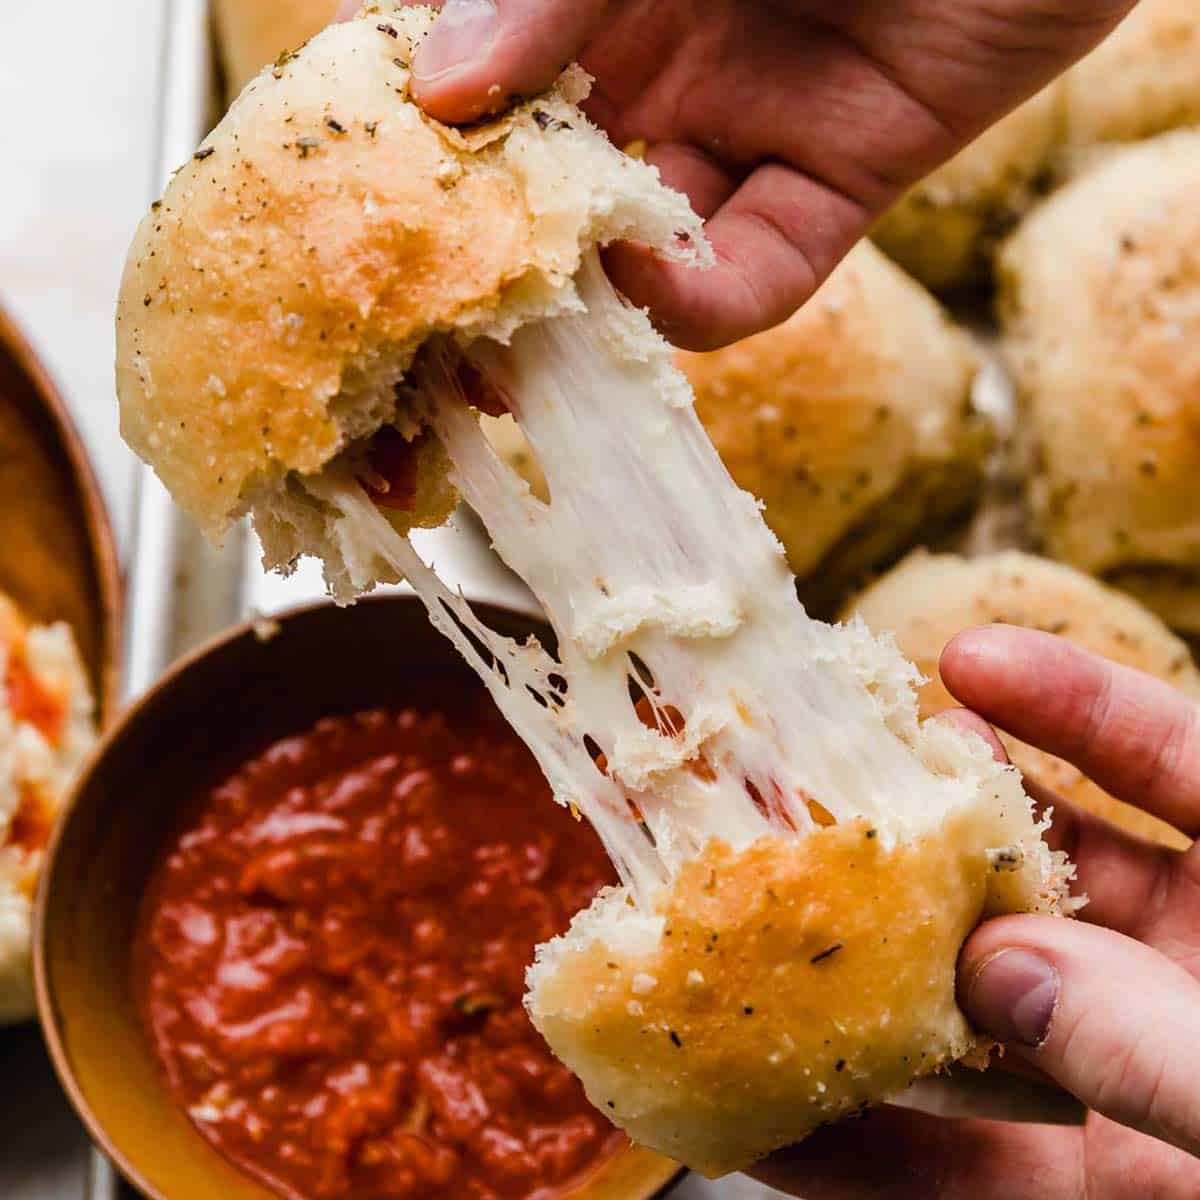 Two hands pulling a pizza roll apart showing the stretchy mozzarella cheese and pepperoni inside.